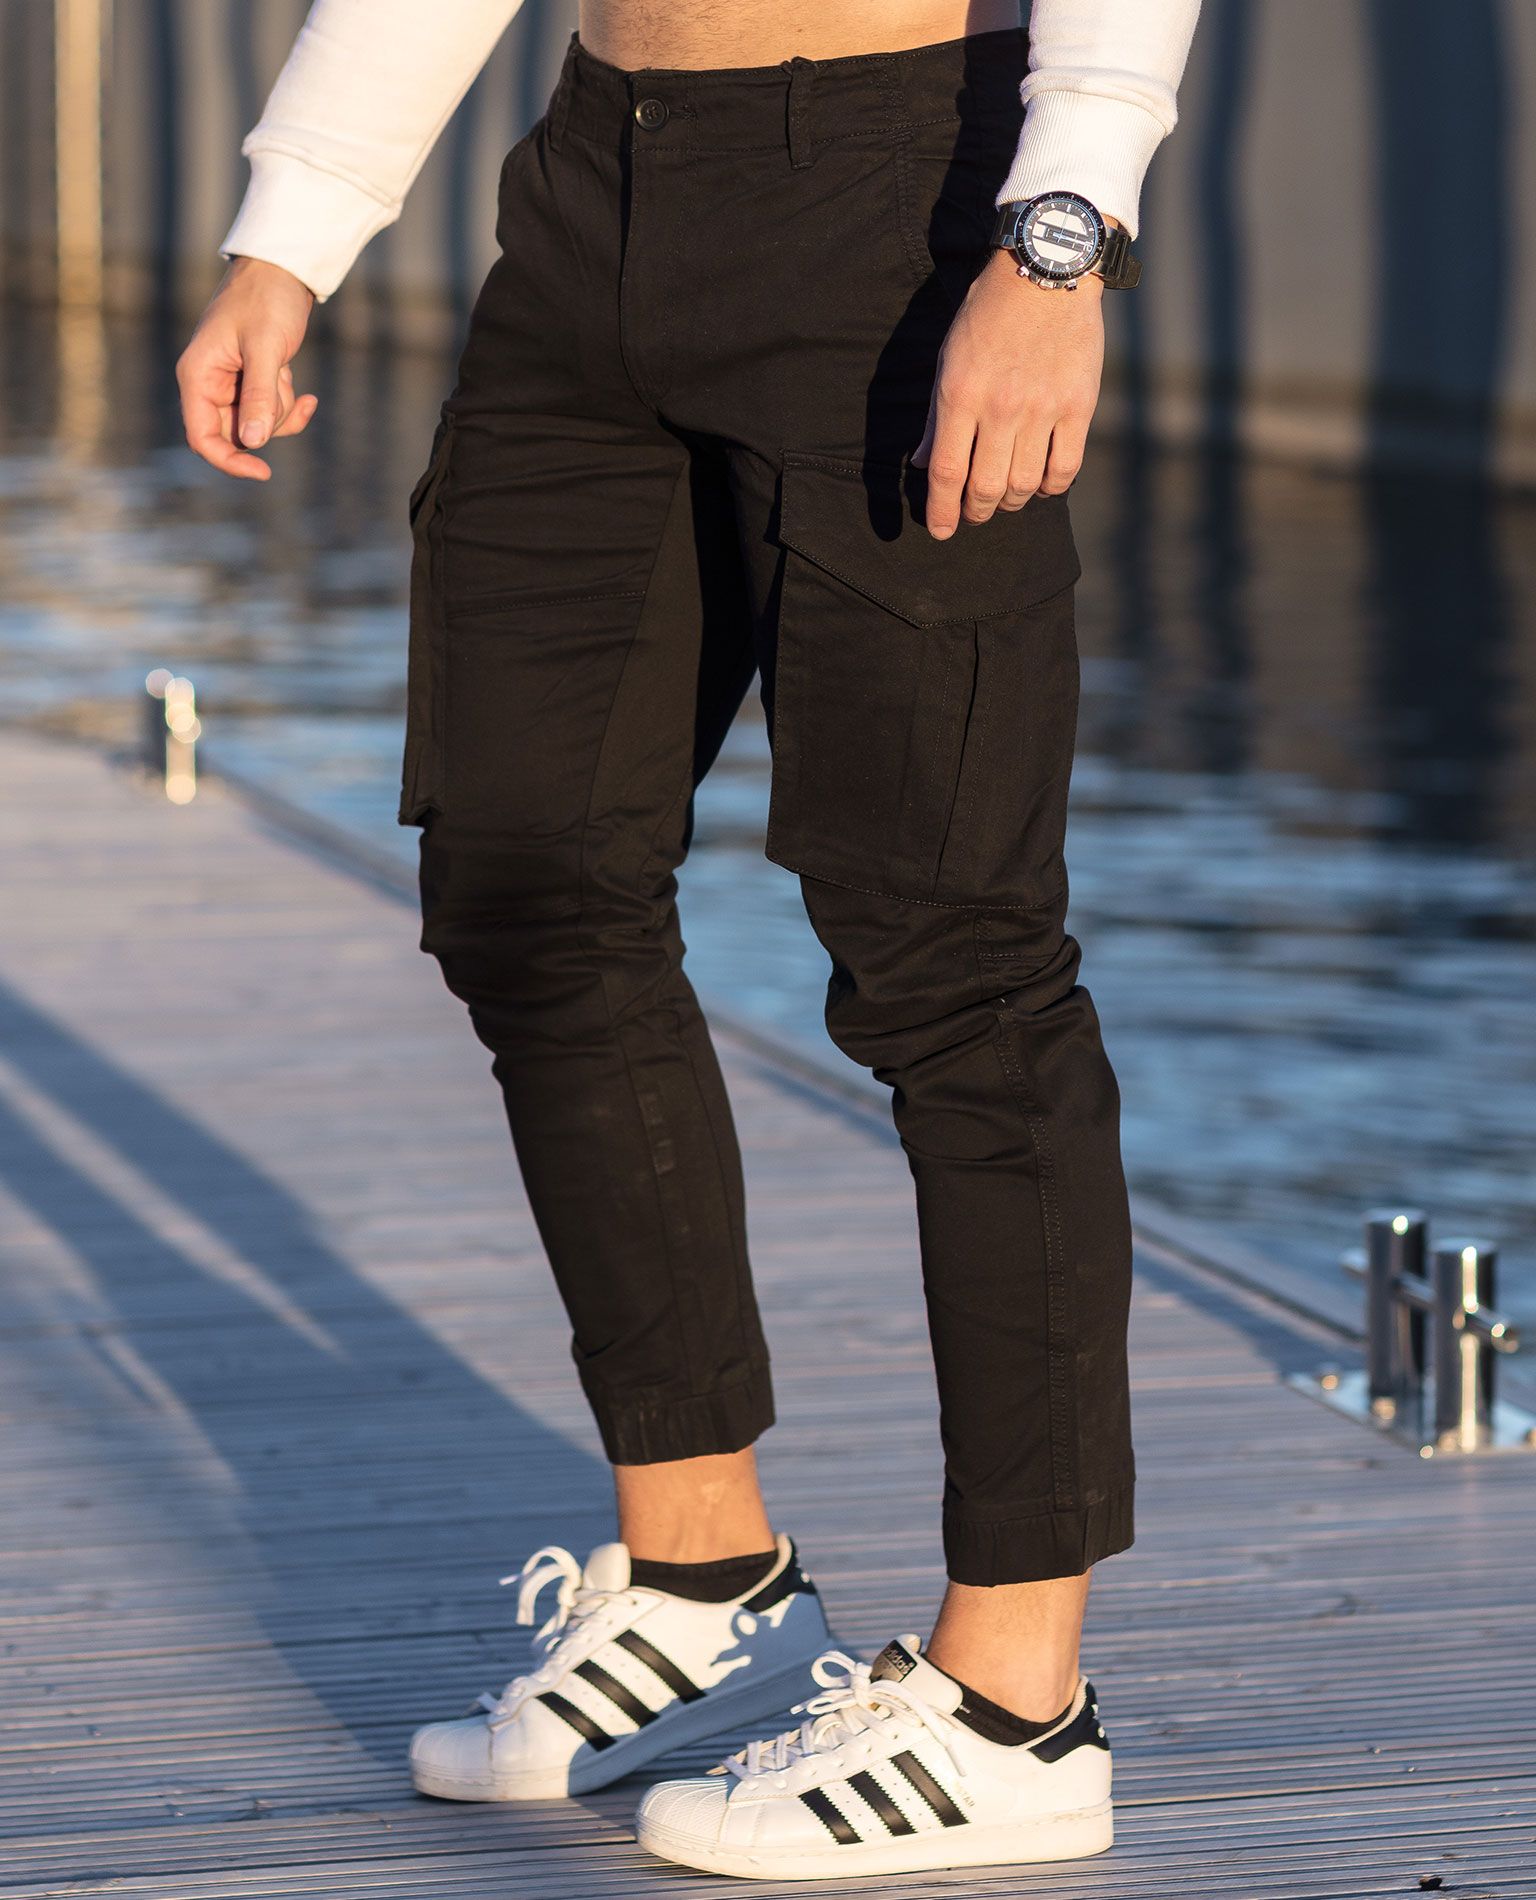 Doodt Weiland Federaal Kim Cargo Pants Black L34 Only & Sons - 0490 - Trousers - Jerone.com